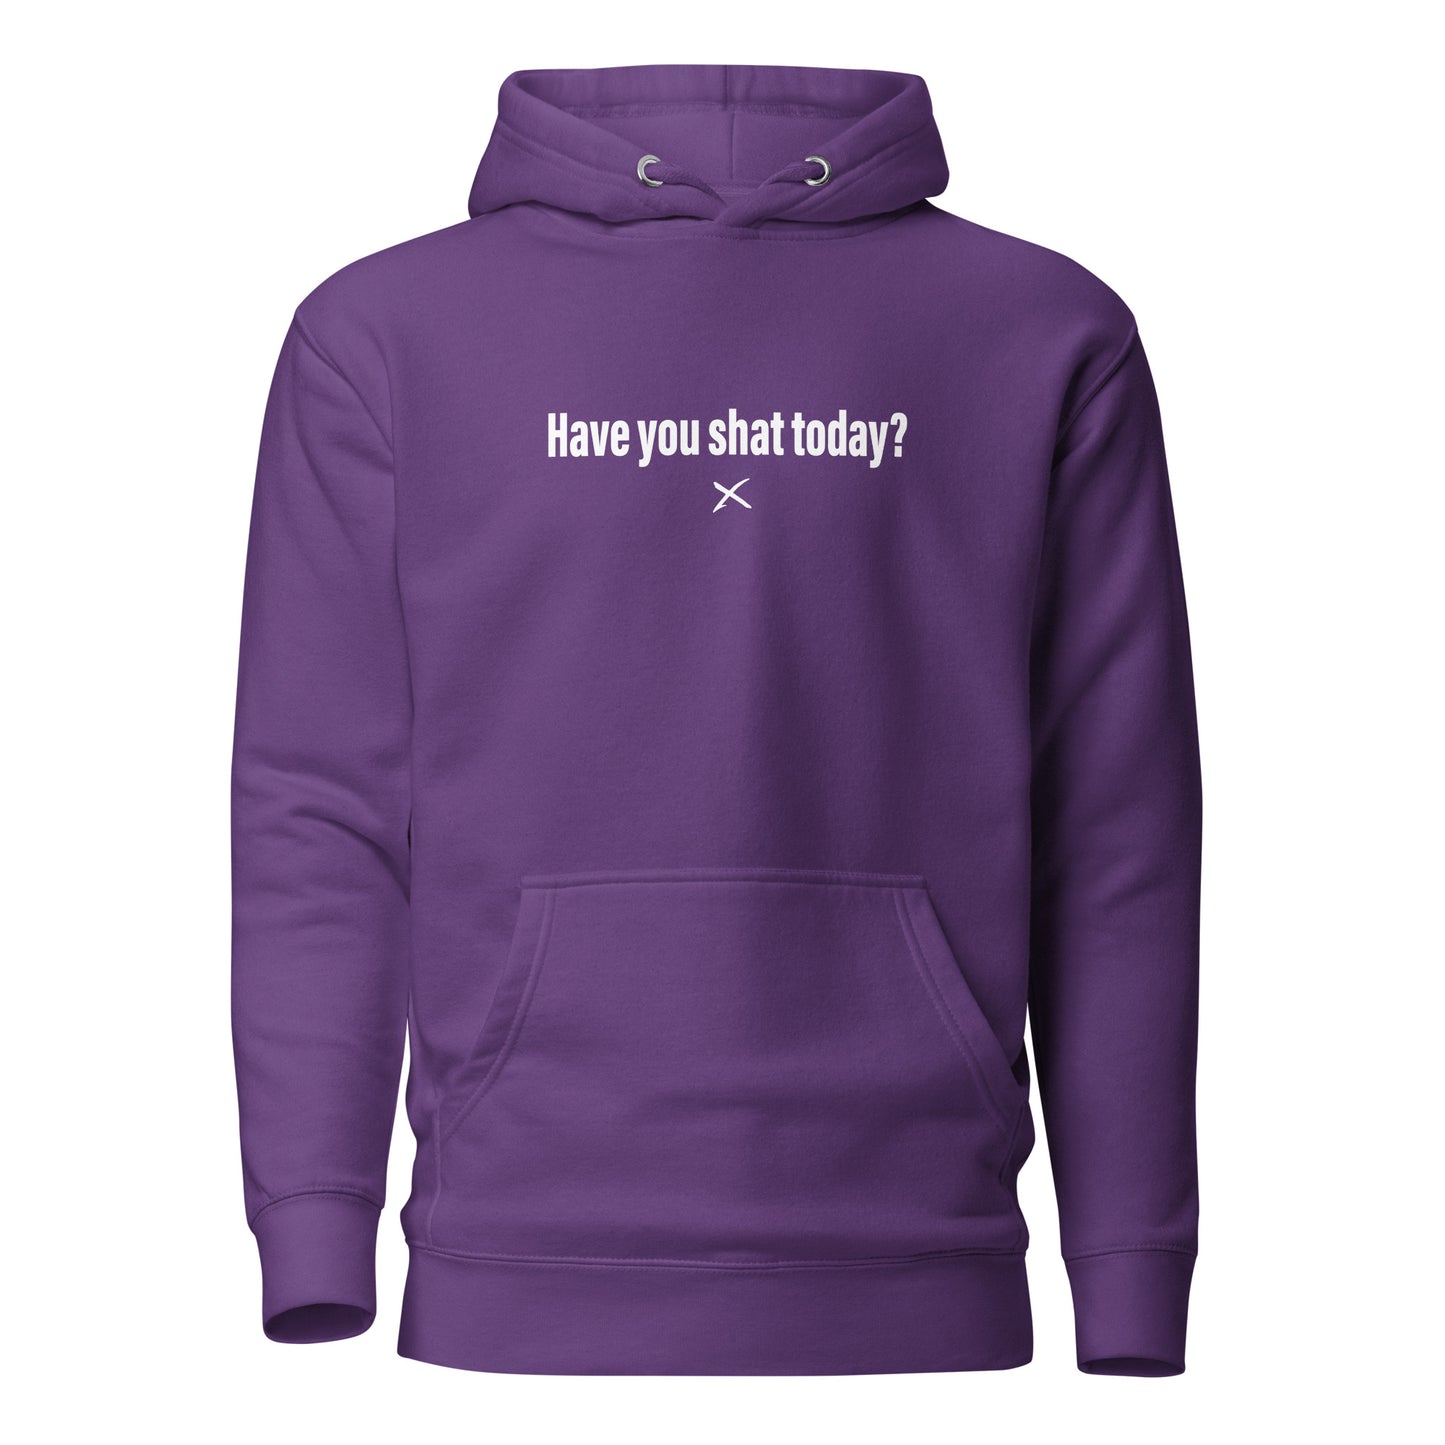 Have you shat today? - Hoodie